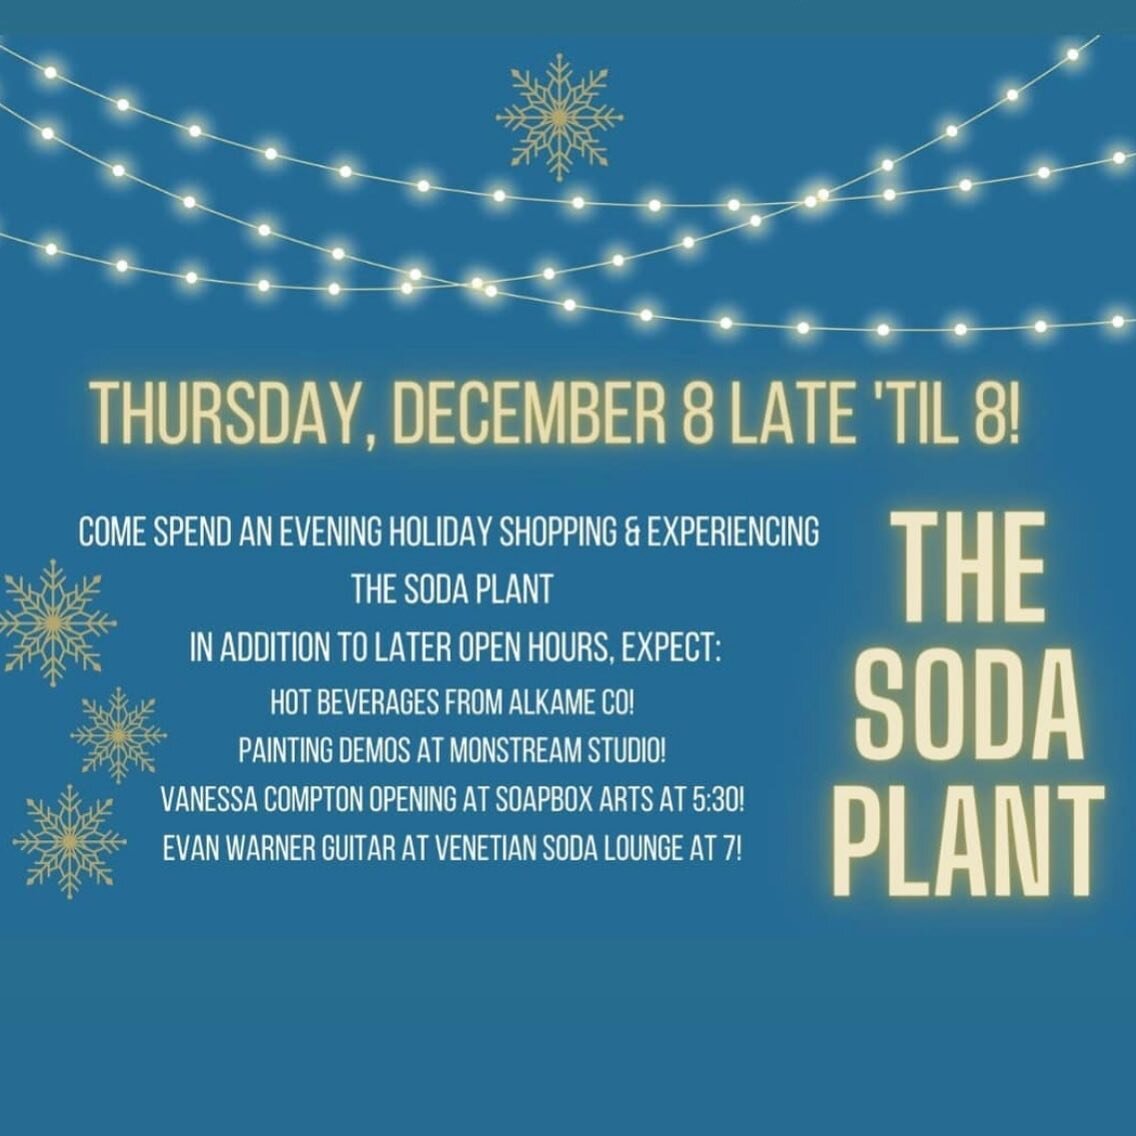 TONIGHT!!! ✨ Businesses will have doors open until 8pm. Stop by for holiday cheer, art, and gifts for everyone on your list!

#thesodaplant #sodaplant #btvsouthend #burlington #madeinvermont #madeinvt #vermont #gallery #vtarts #vtartists #vtcraft #so